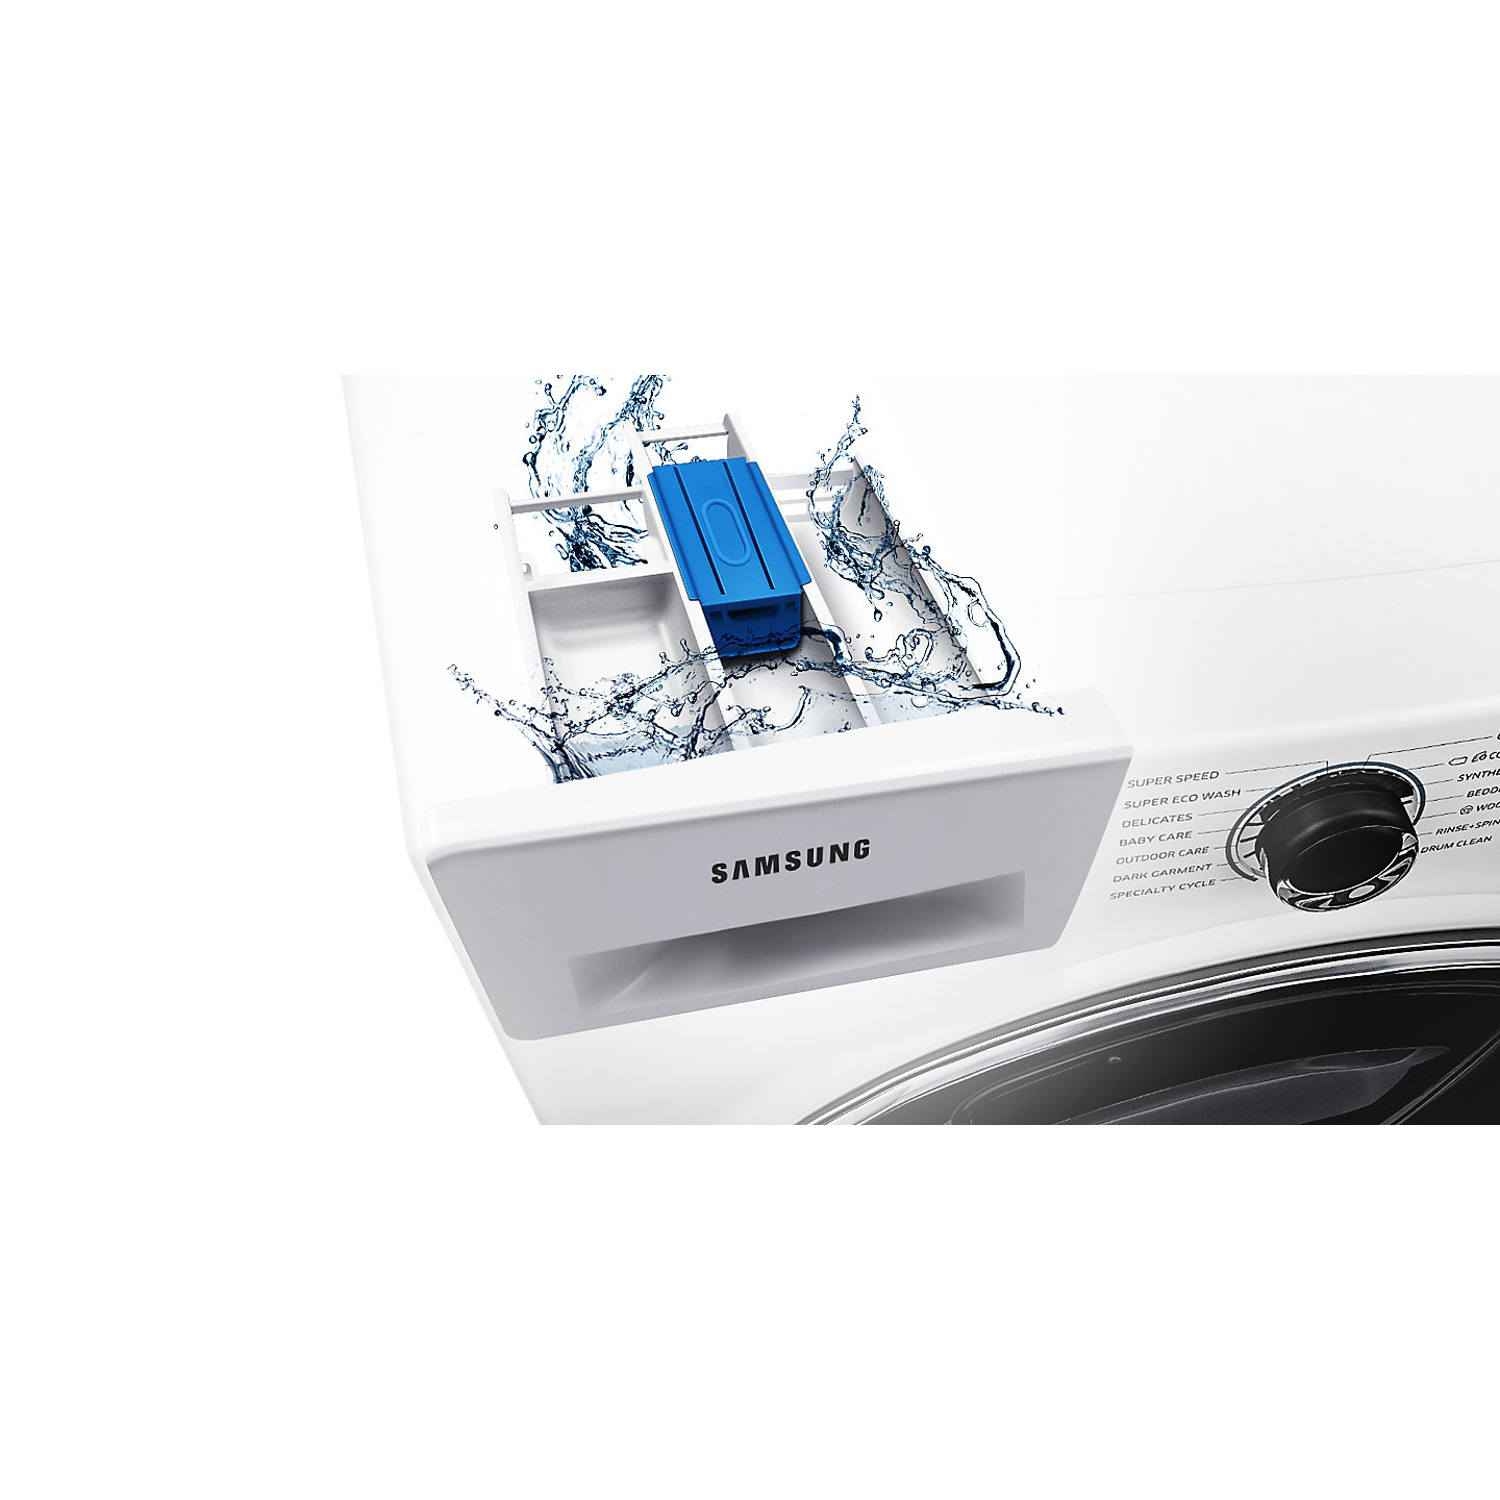 Samsung 7kg 1400 Spin Washing Machine - White - A+++ Rated - 2